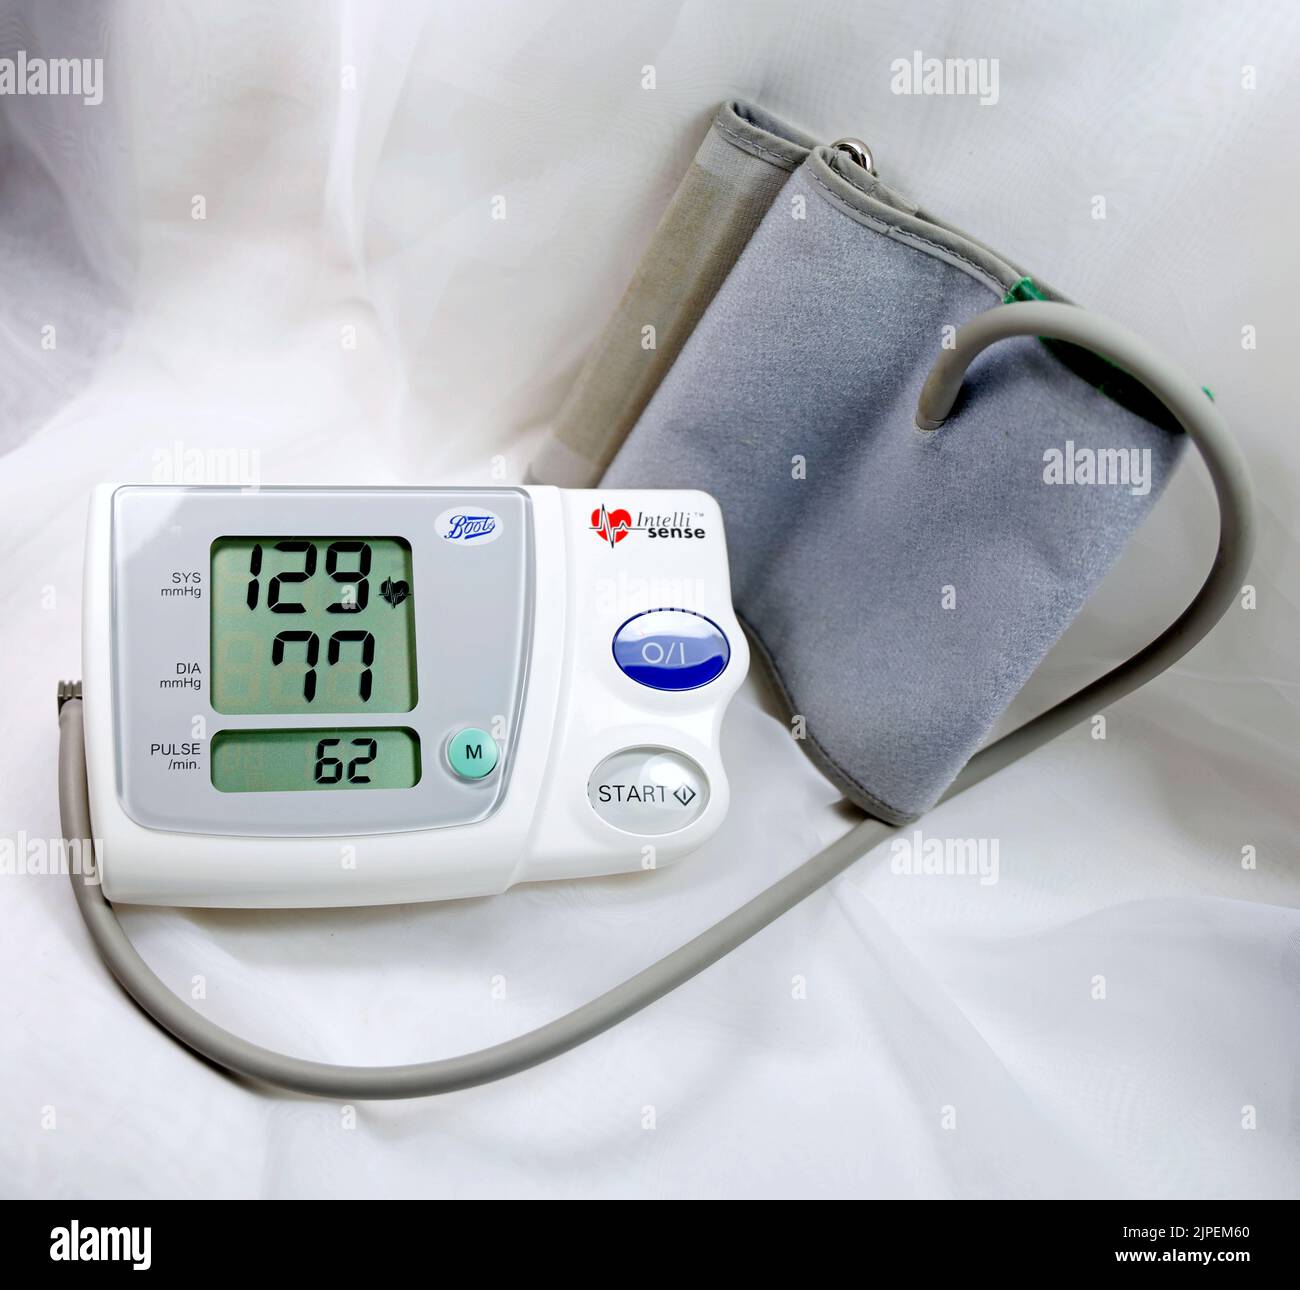 Blood pressure monitor and cuff showing blood pressure reading and pulse rate. Stock Photo